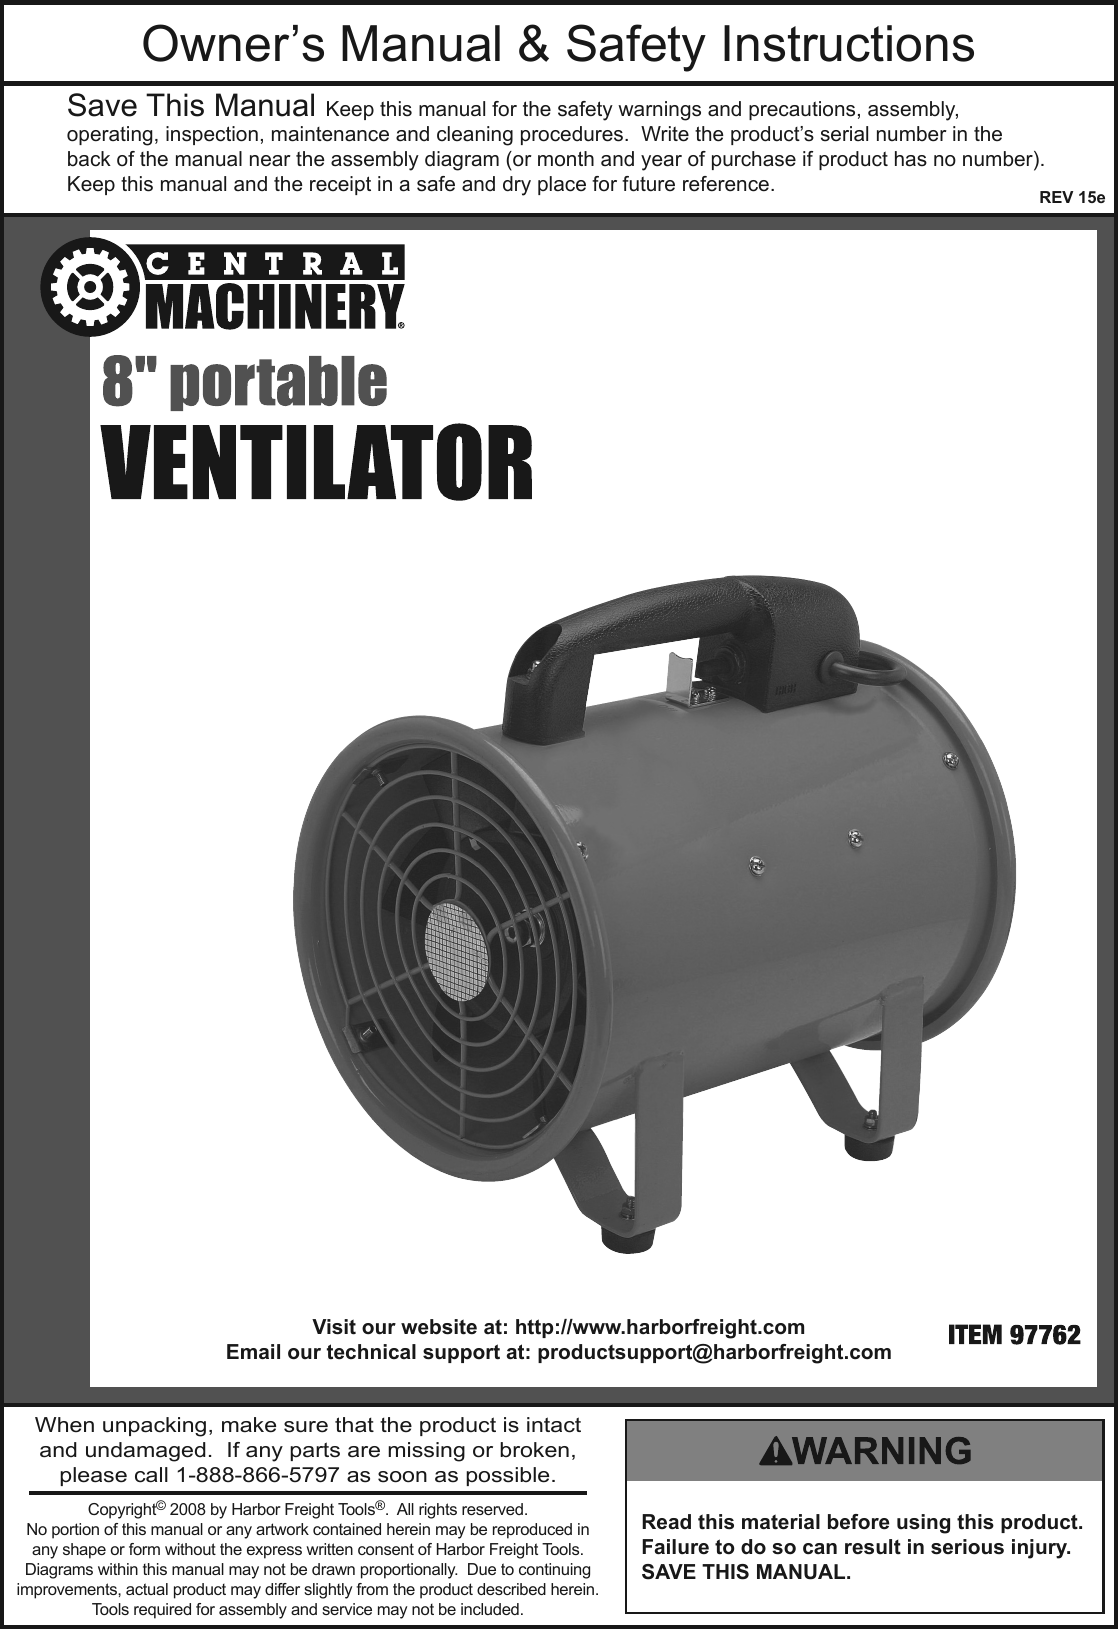 Page 1 of 8 - Harbor-Freight Harbor-Freight-8In-Portable-Ventilator-Product-Manual-  Harbor-freight-8in-portable-ventilator-product-manual